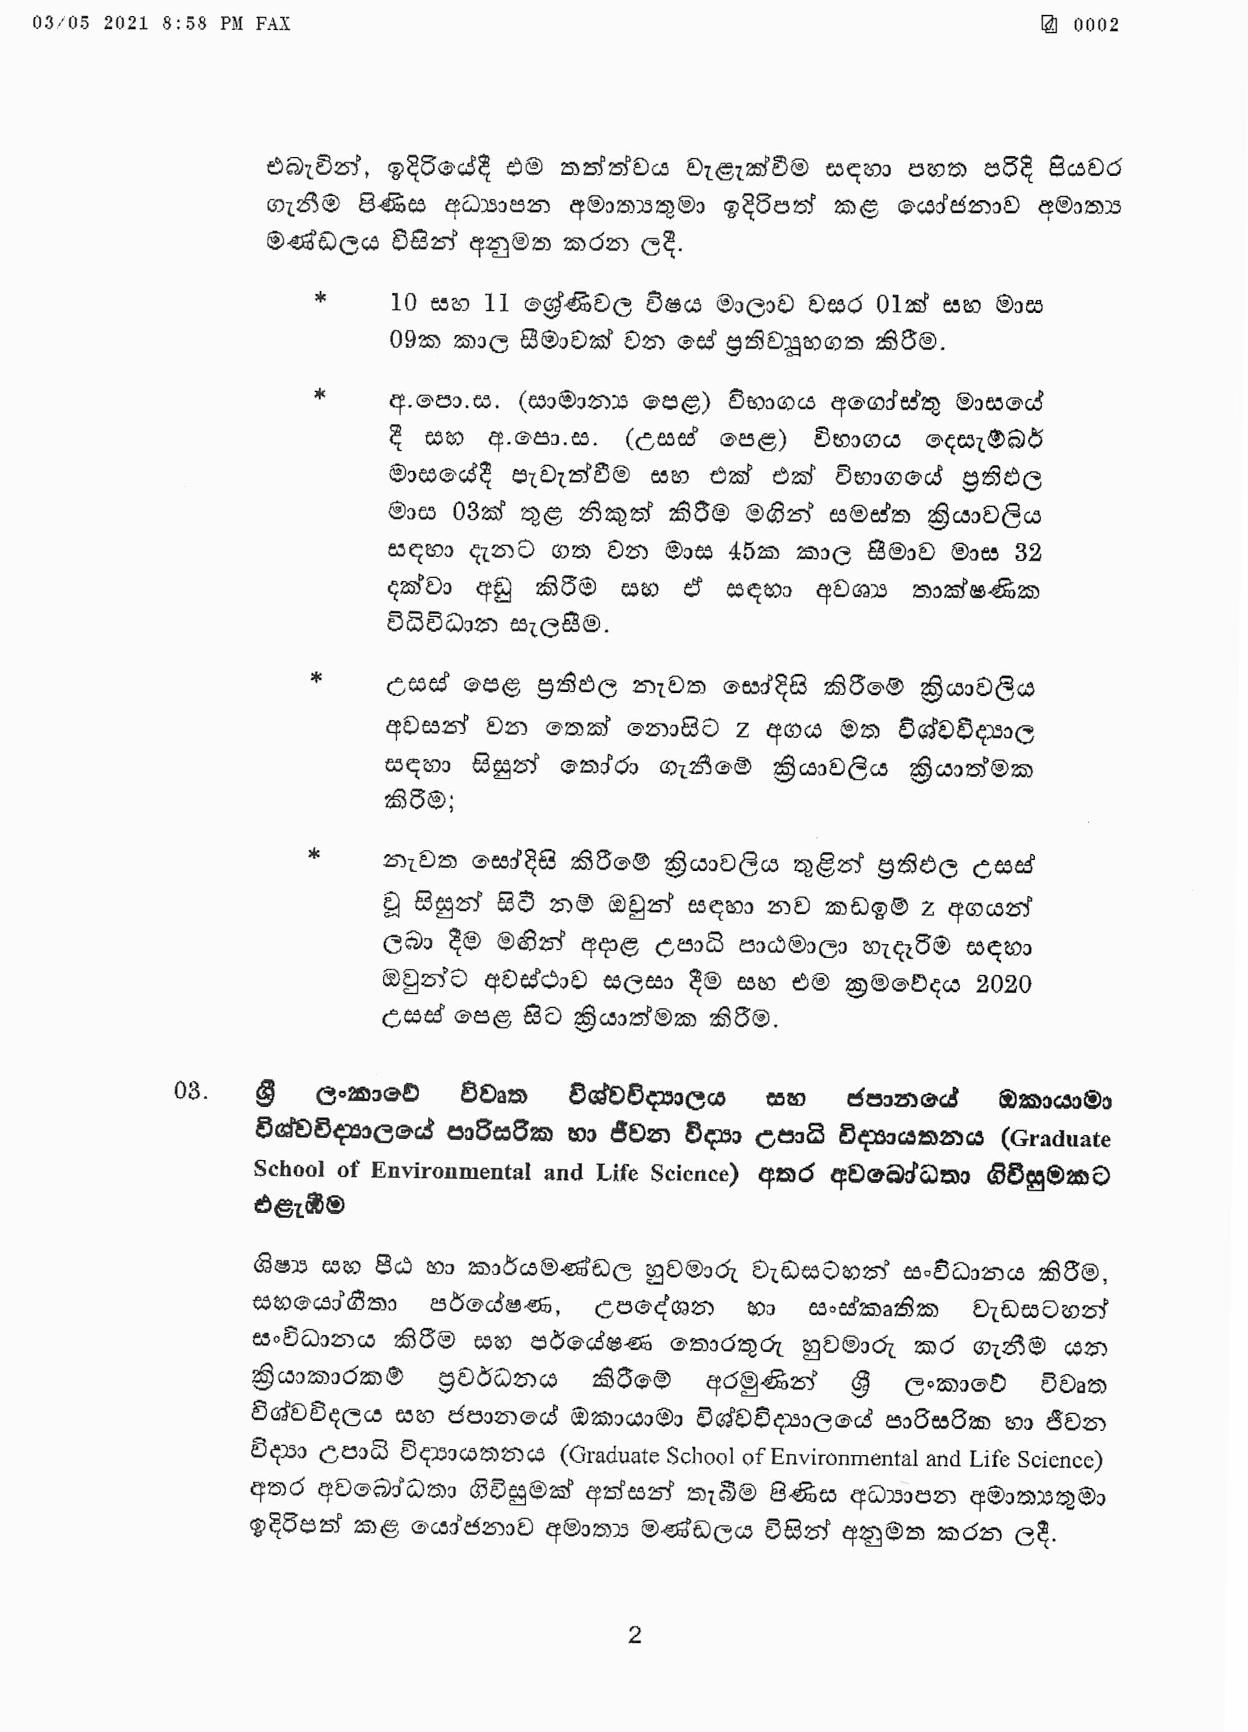 Cabinet Decision on 03.05.2021 page 002